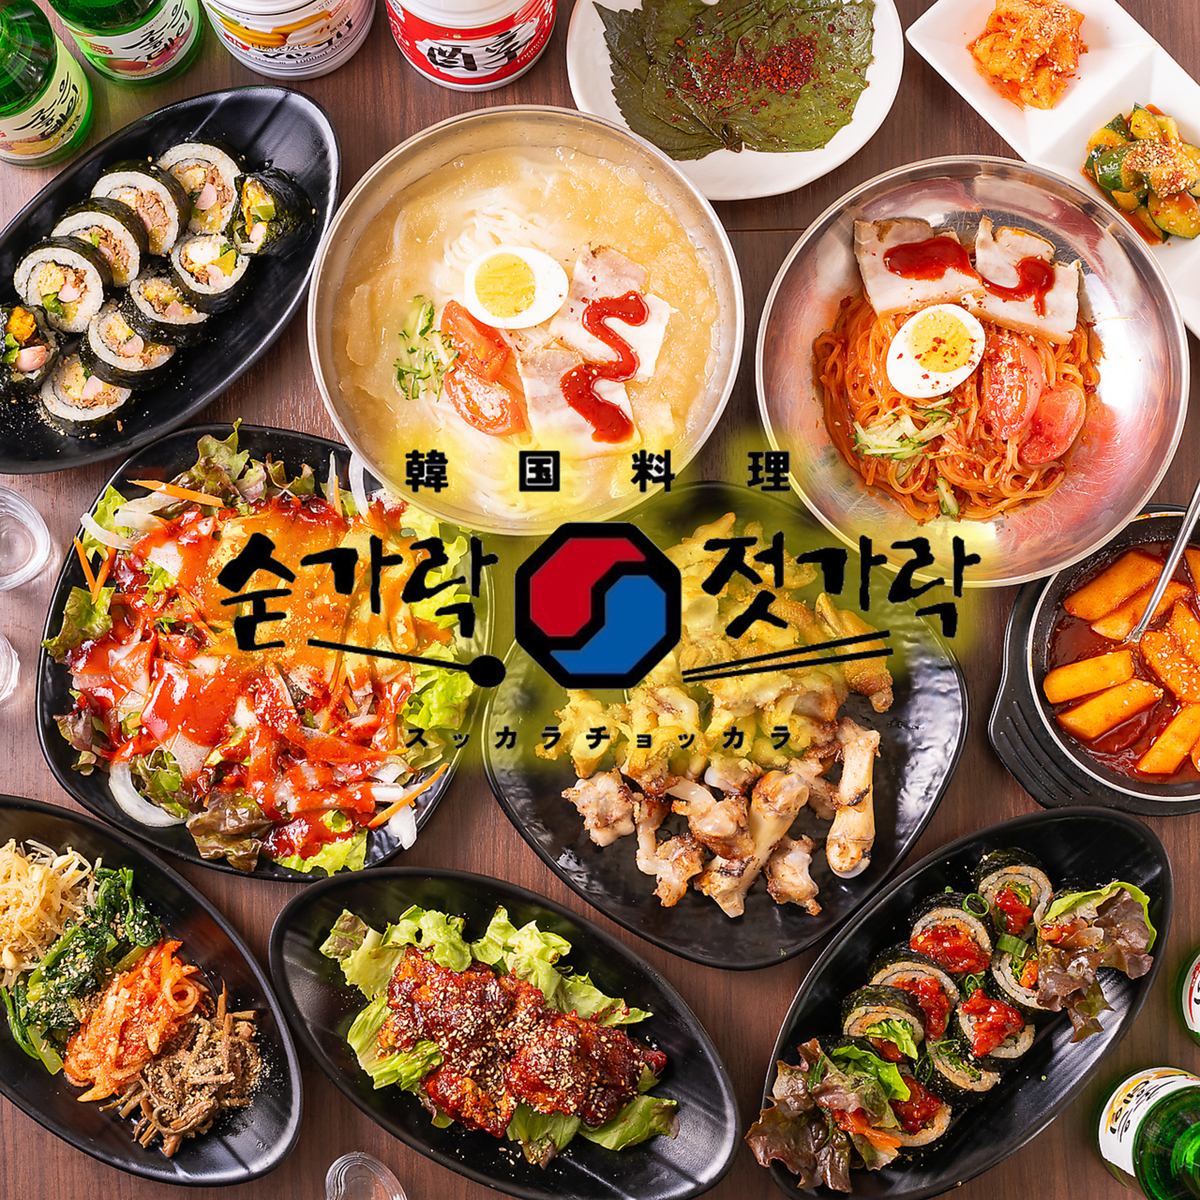 Please spend a fun time at a Korean izakaya where you can enjoy authentic Korean food and a variety of alcoholic drinks.